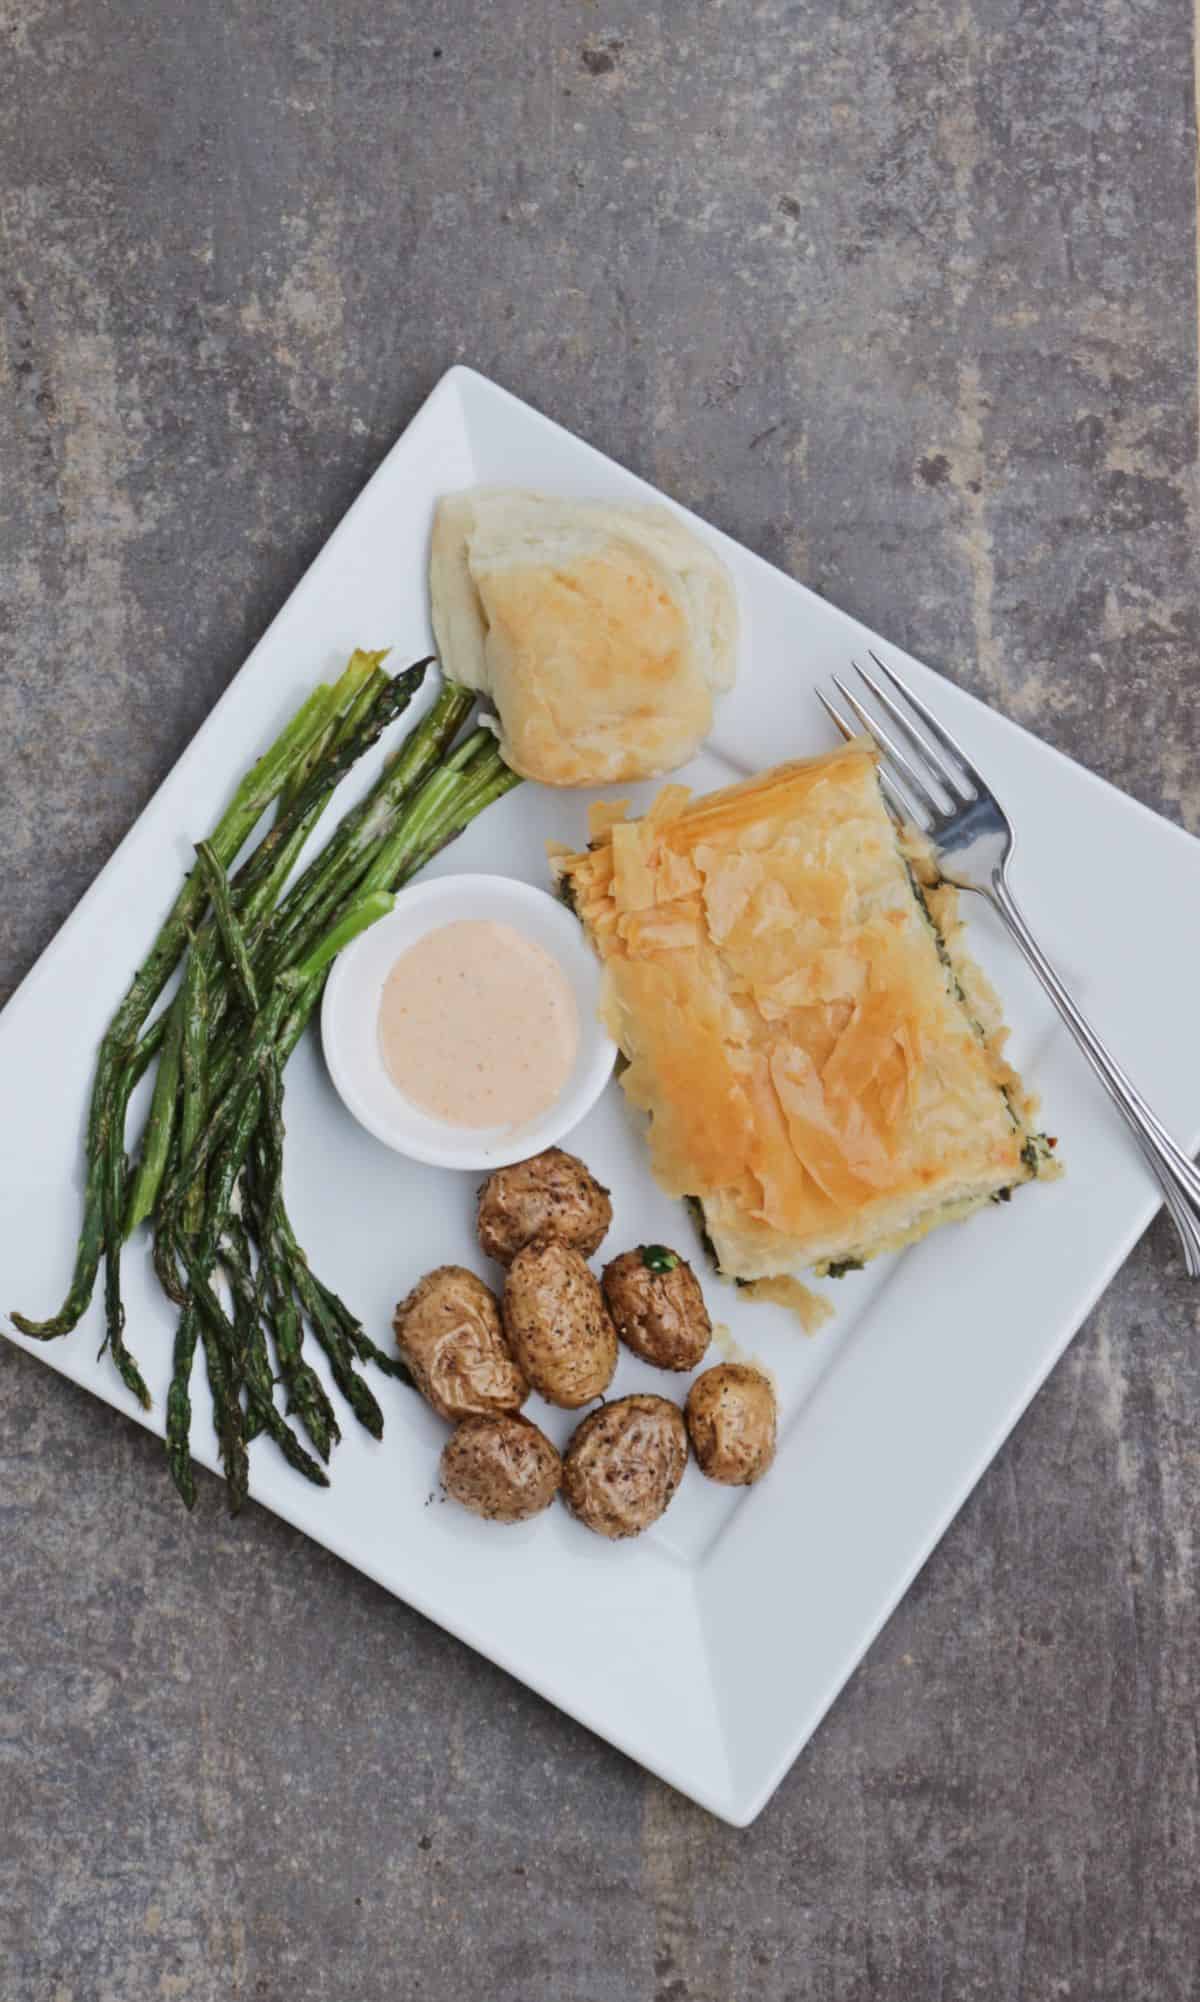 dinner plate with albanian spinach pie, roasted potatoes, asparagus, sauce and roll